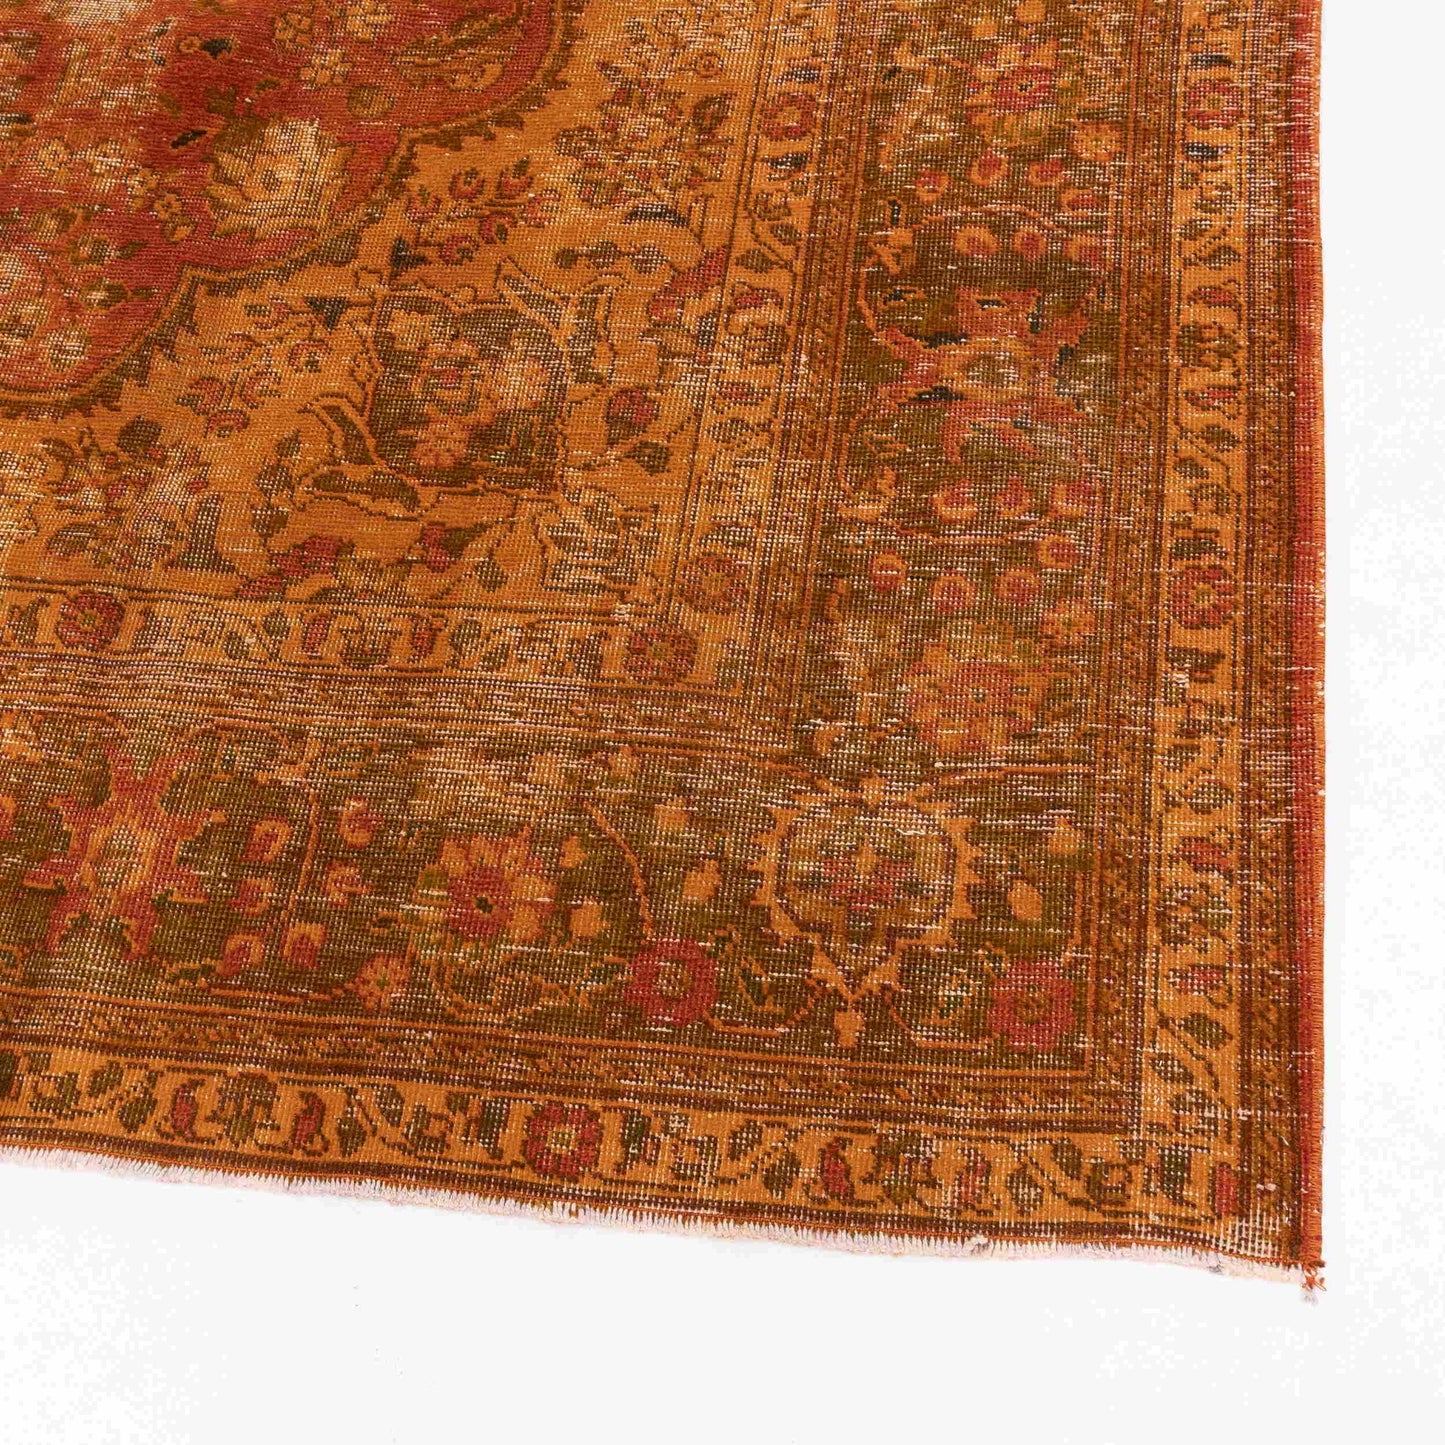 Oriental Rug Vintage Hand Knotted Wool On Cotton 252 x 345 Cm - 8' 4'' x 11' 4'' ER23